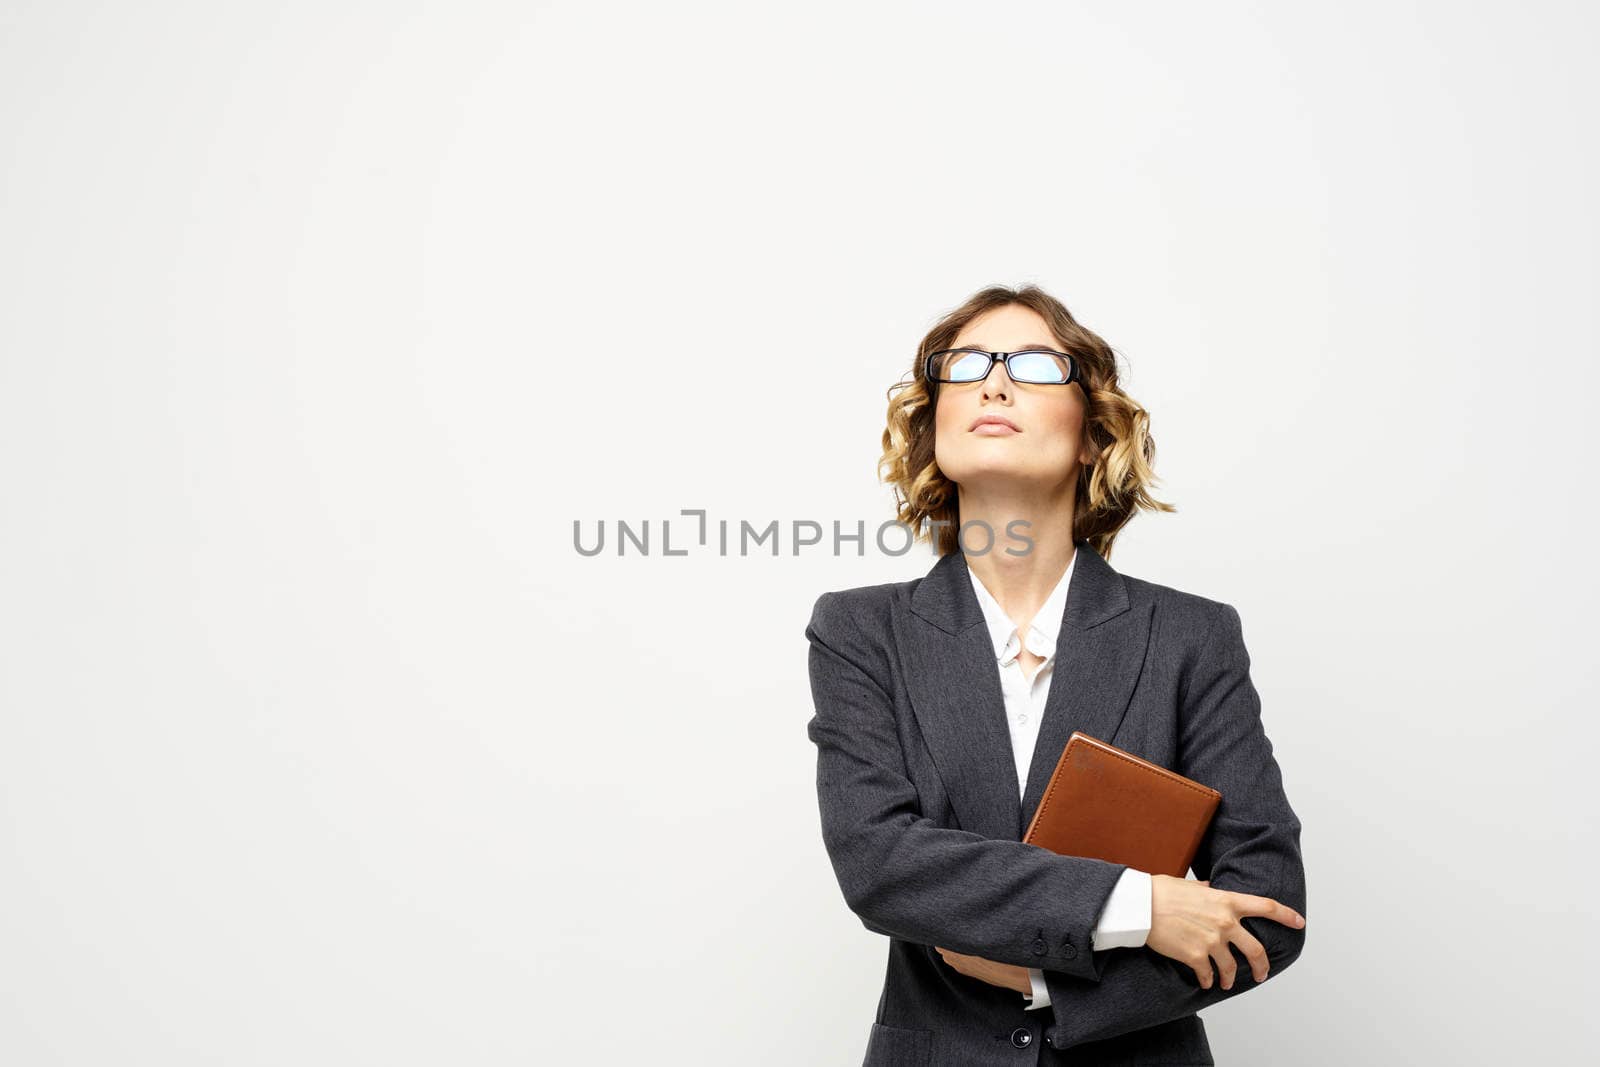 Business woman with notepad and glasses work light background cropped view of suit model. High quality photo